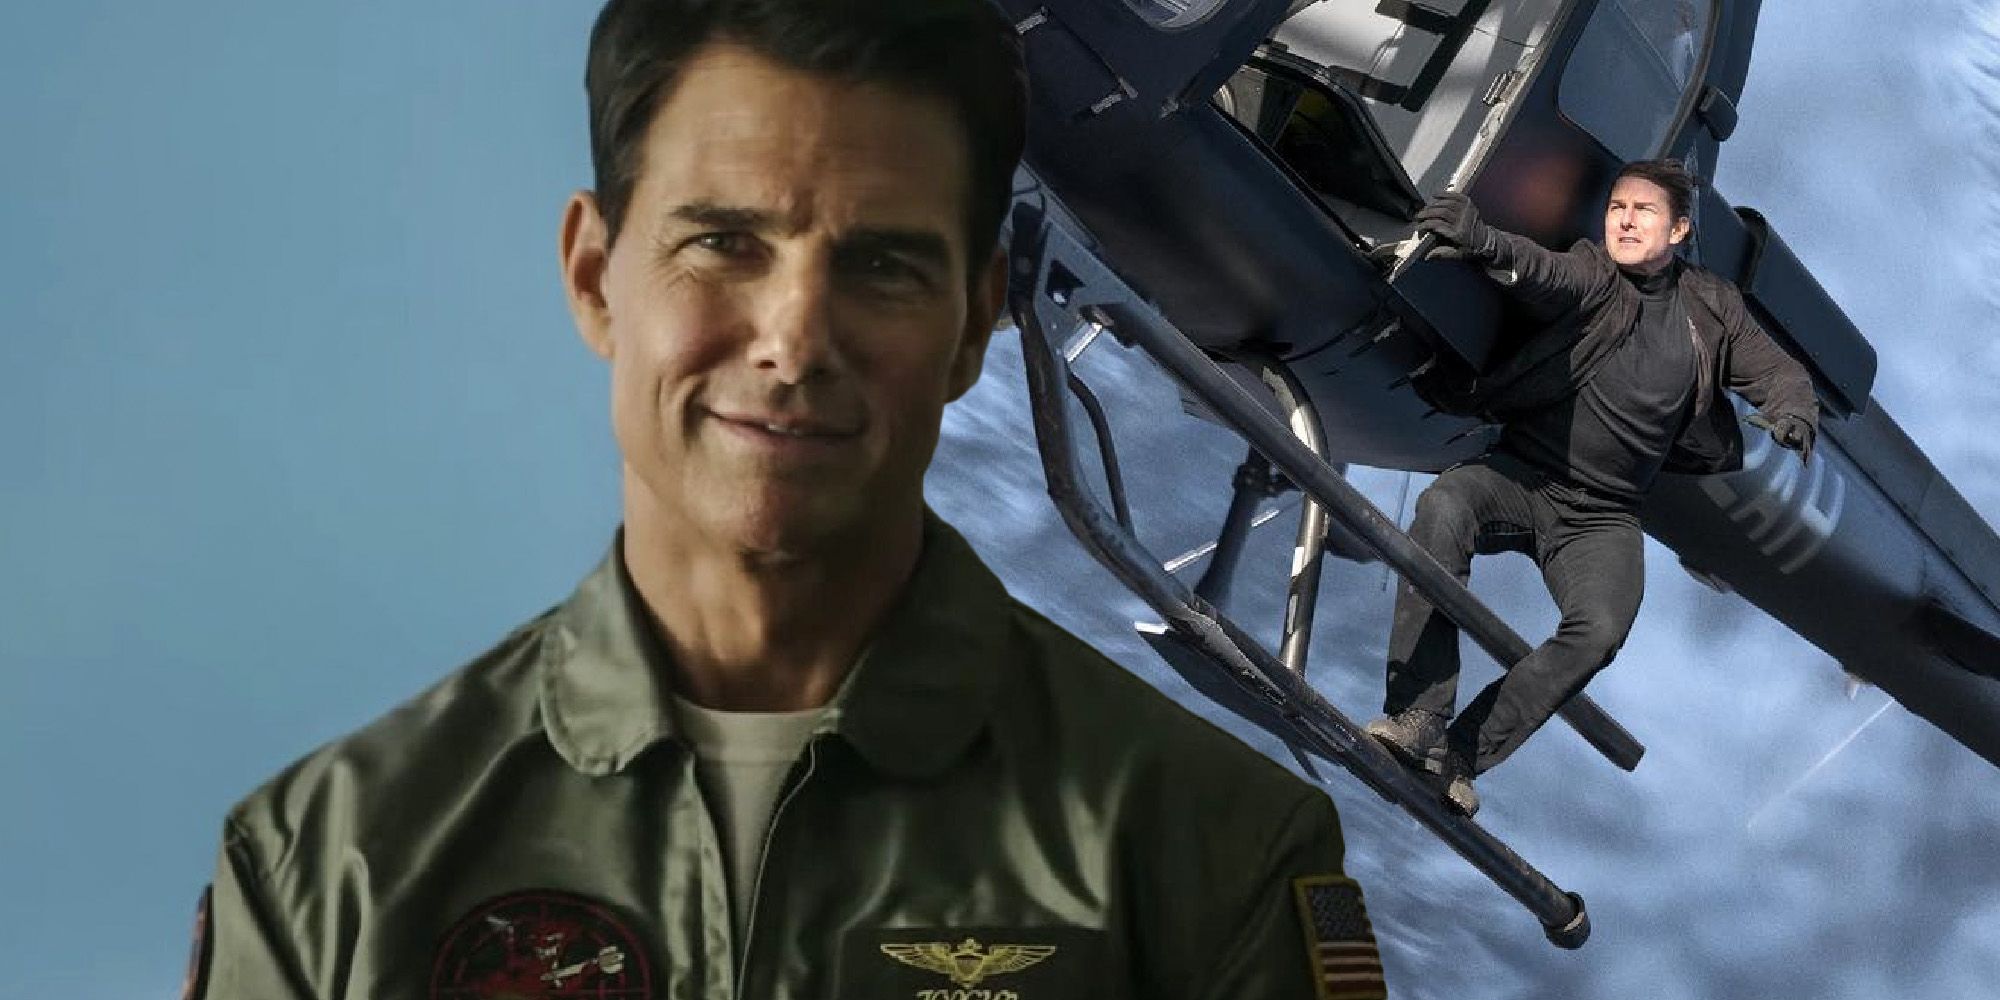 2021 Could Finally Give Tom Cruise A $1 Billion Movie